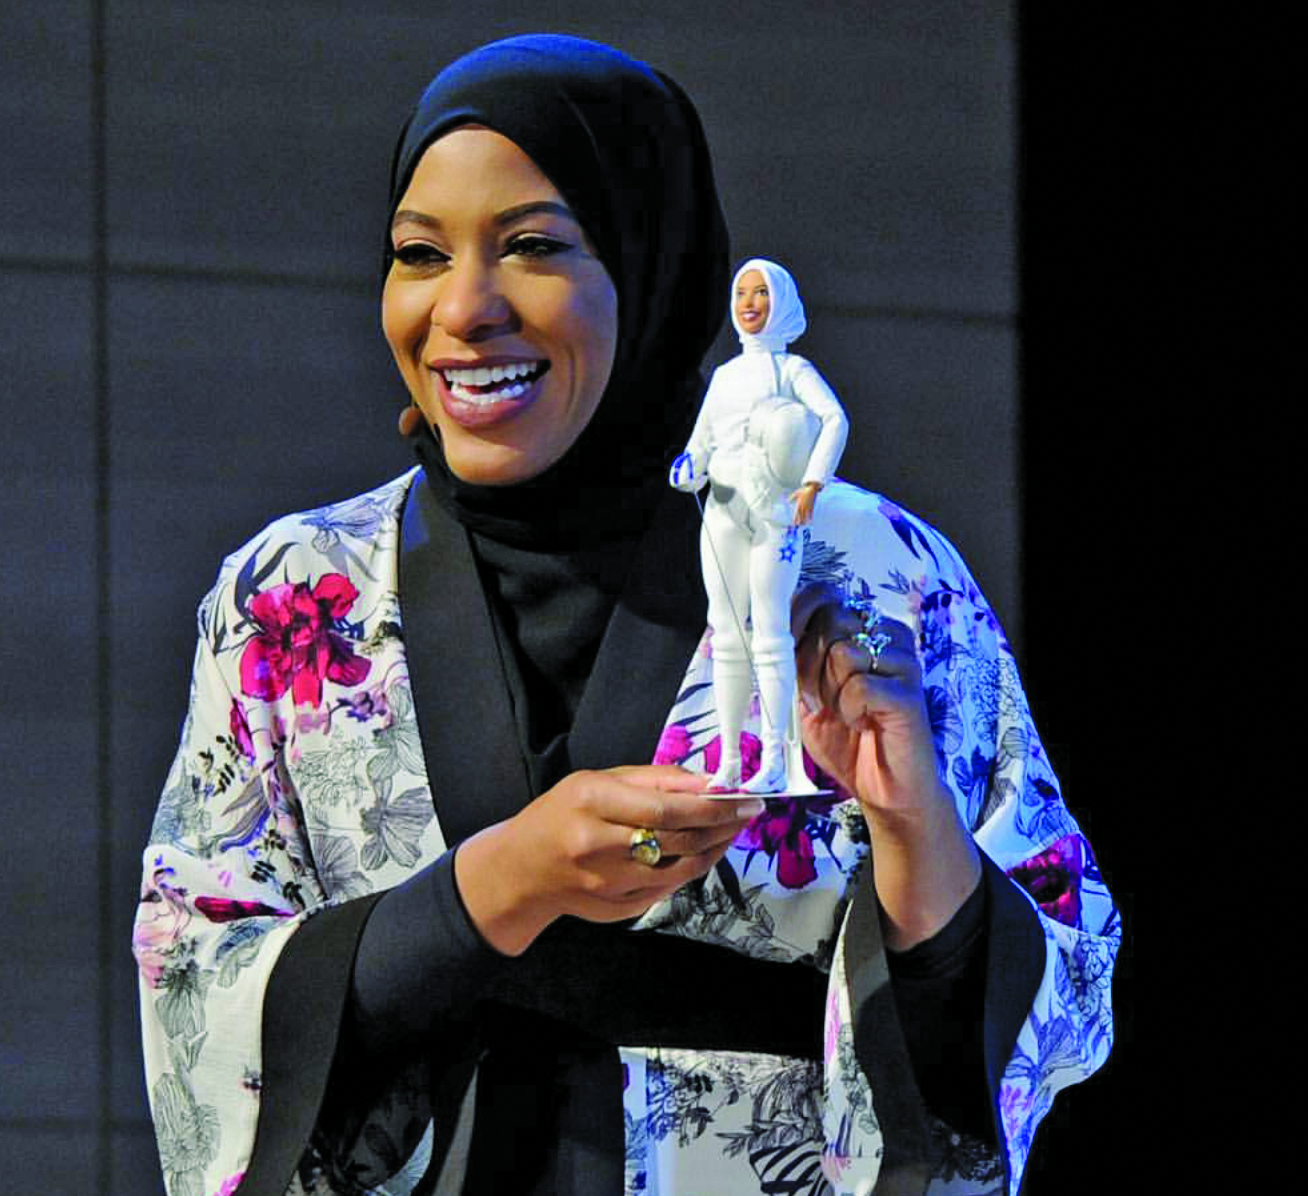 Hijabi Olympic fencer makes history again with namesake Barbie doll